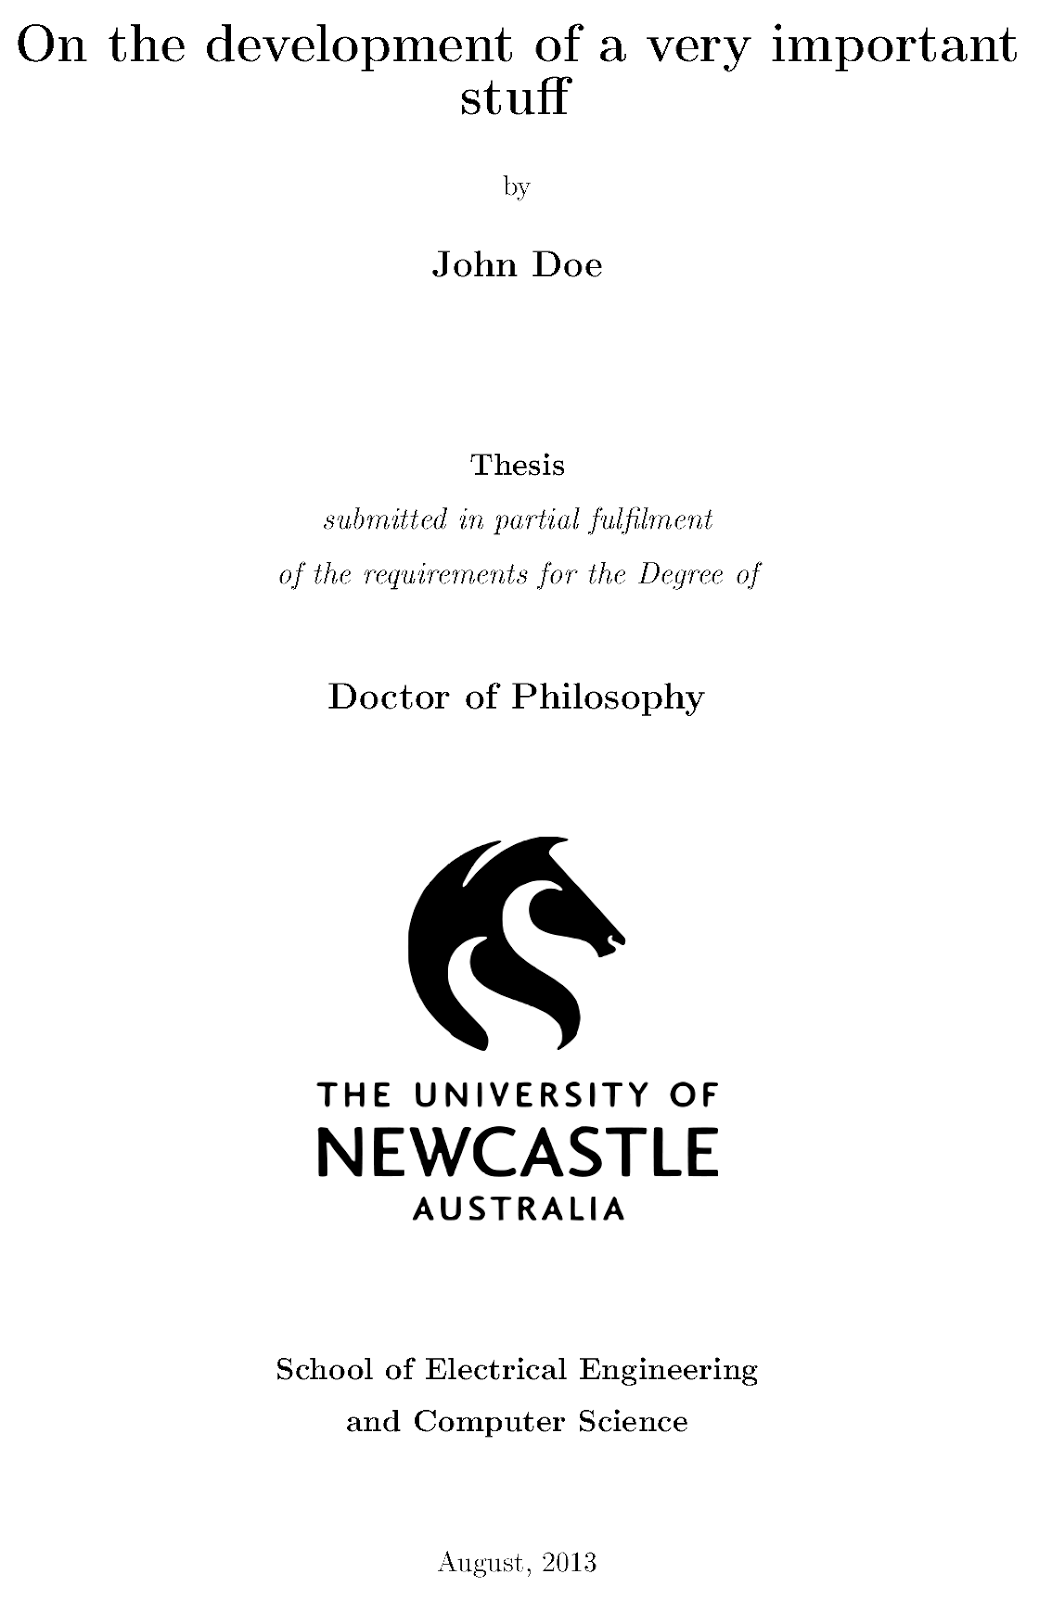 Masters thesis latex